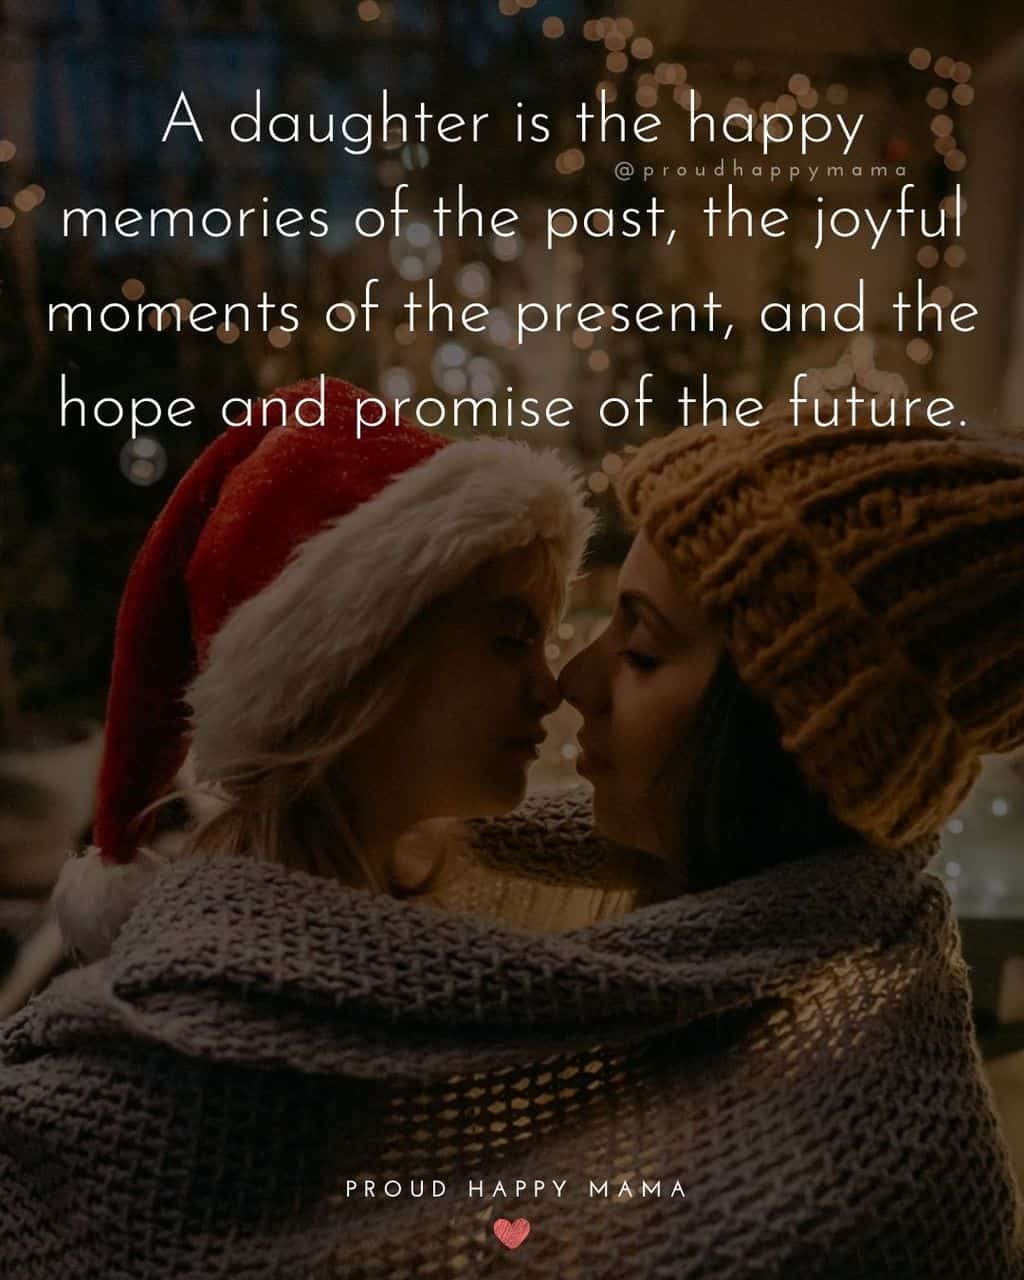 Dprecious quotes for daughter - ‘A-daughter-is-the-happy-memories-of-the-past-the-joyful-moments-of-the-present-and-the-hope-and-promise-of-the